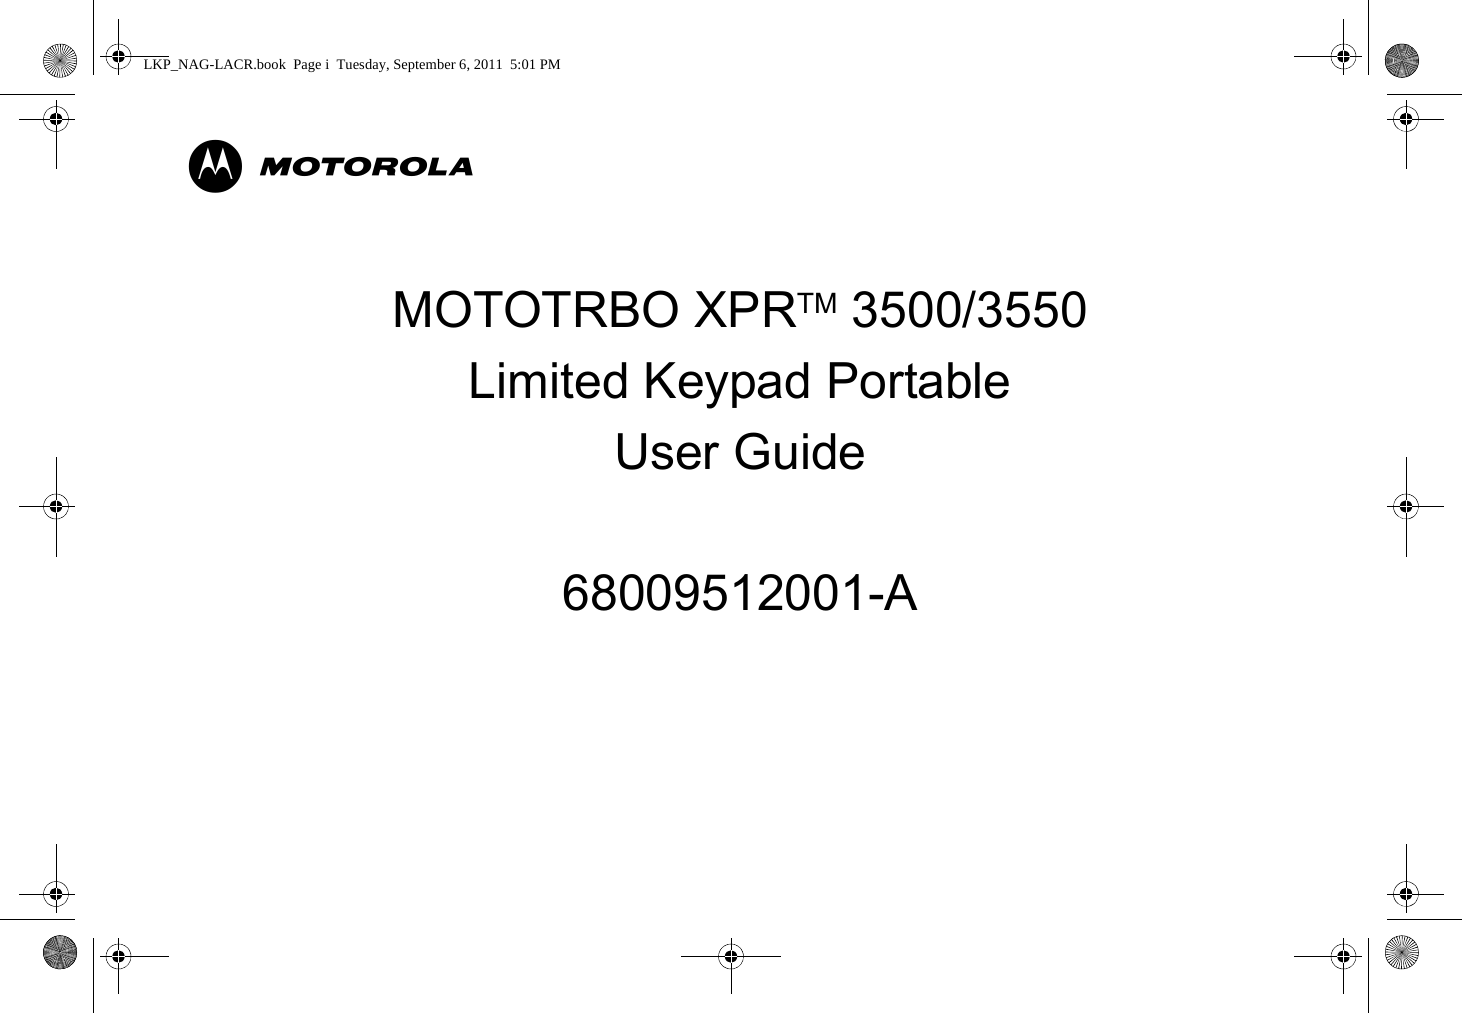 MMOTOTRBO XPRTM 3500/3550Limited Keypad PortableUser Guide68009512001-ALKP_NAG-LACR.book  Page i  Tuesday, September 6, 2011  5:01 PM